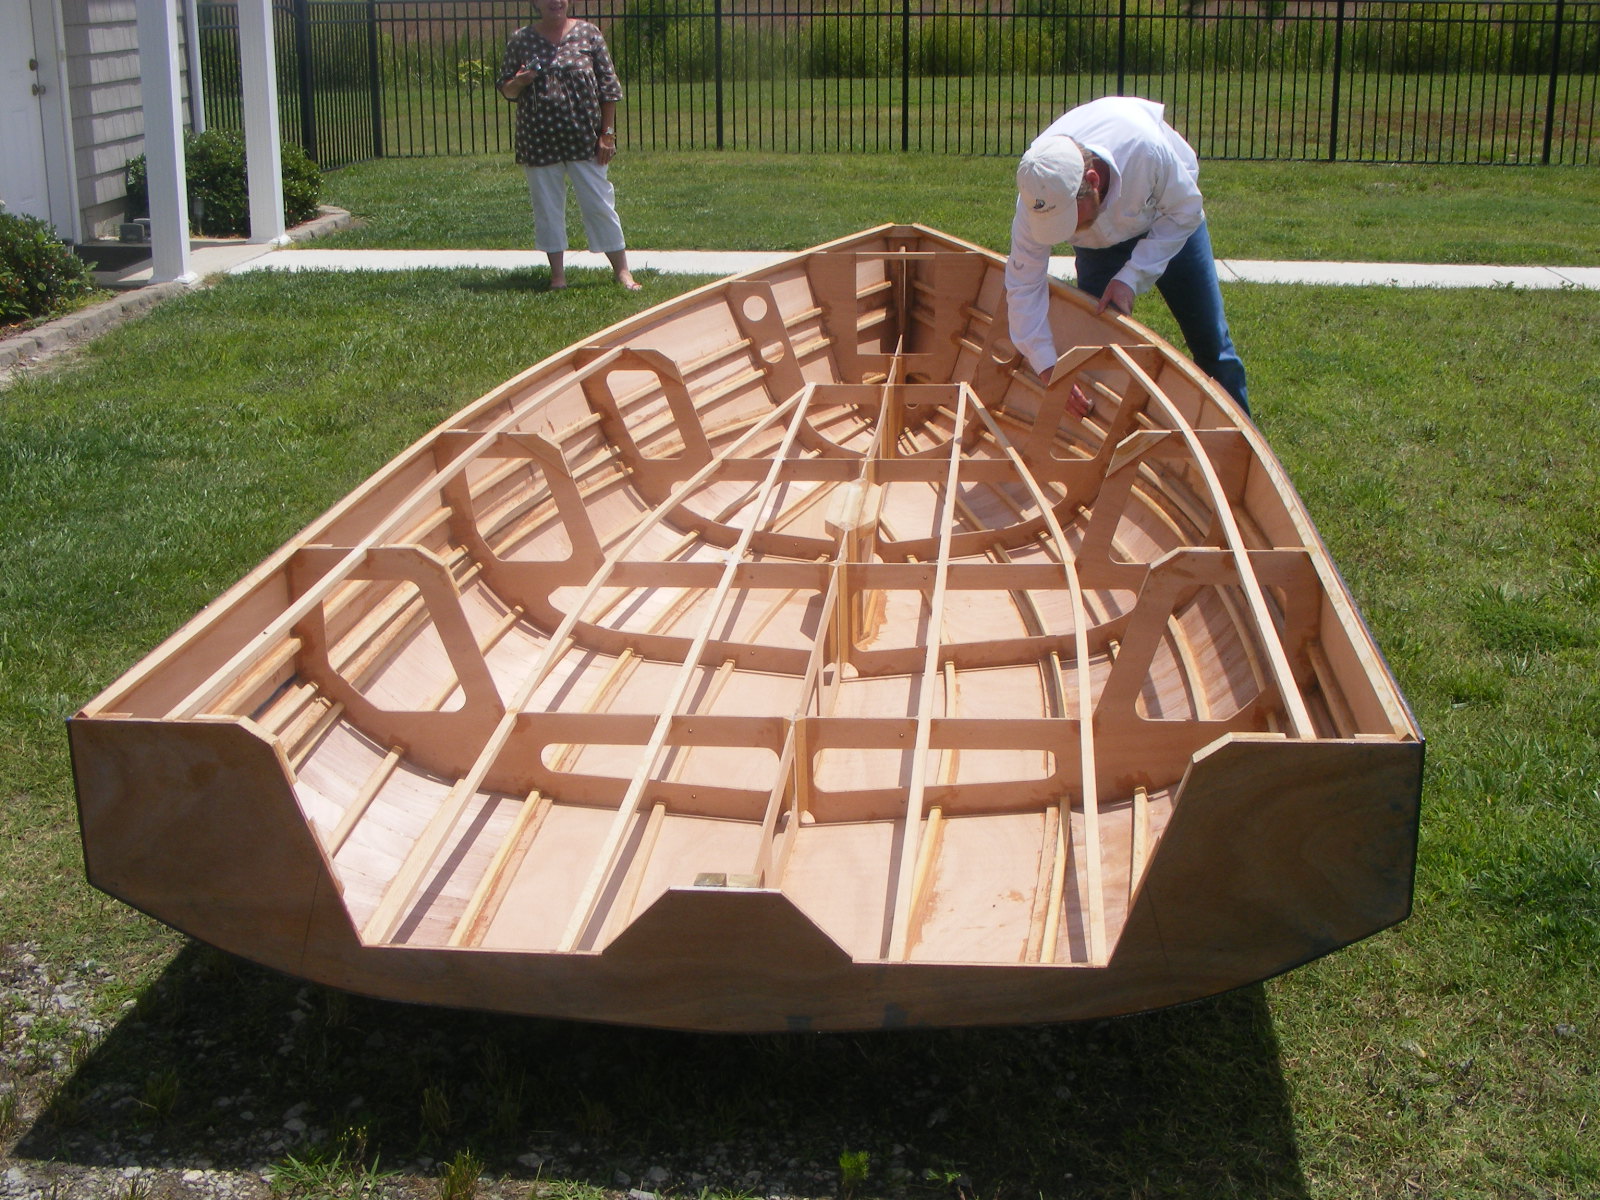  Building Kits Plans PDF Download – DIY Wooden Boat Plans Projects